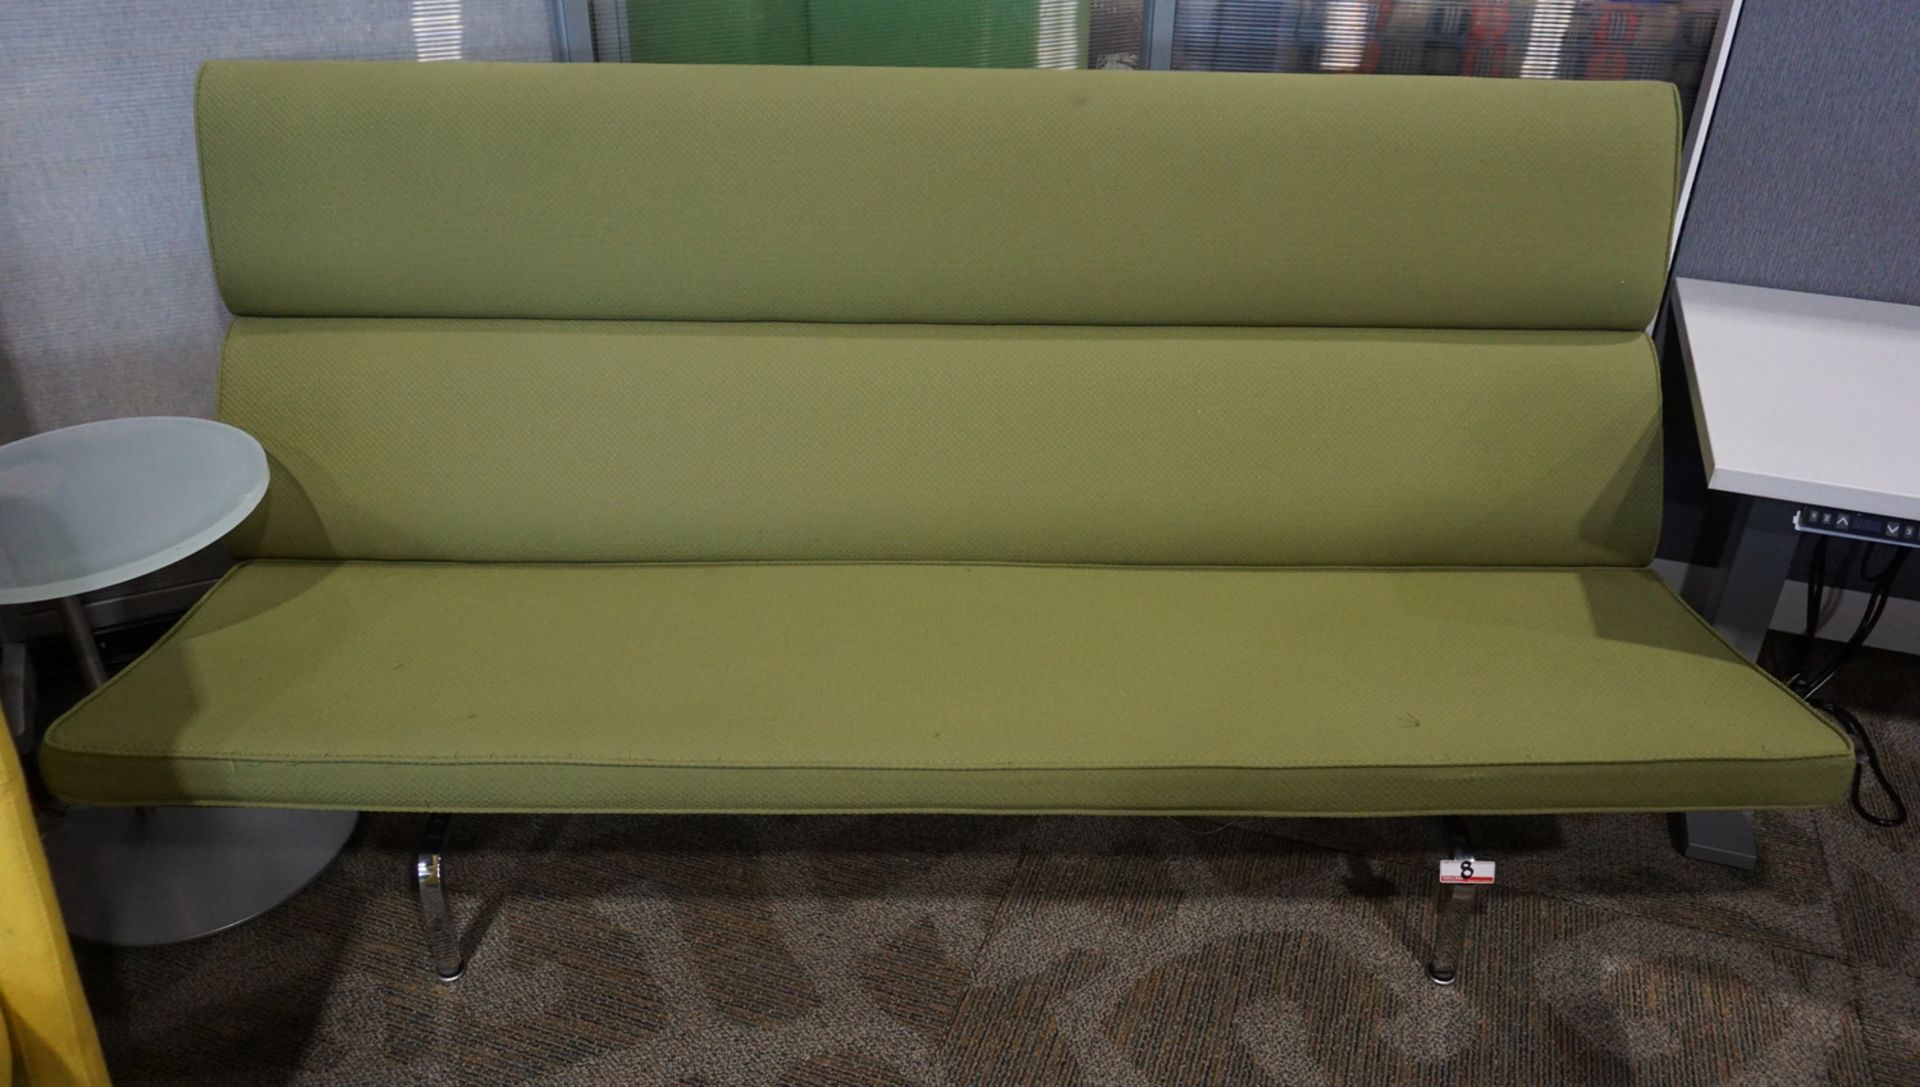 HERMAN MILL EAMES GREEN UPHOLSTERED ARMLESS SOFA ($5,600 MSRP) - Image 3 of 3